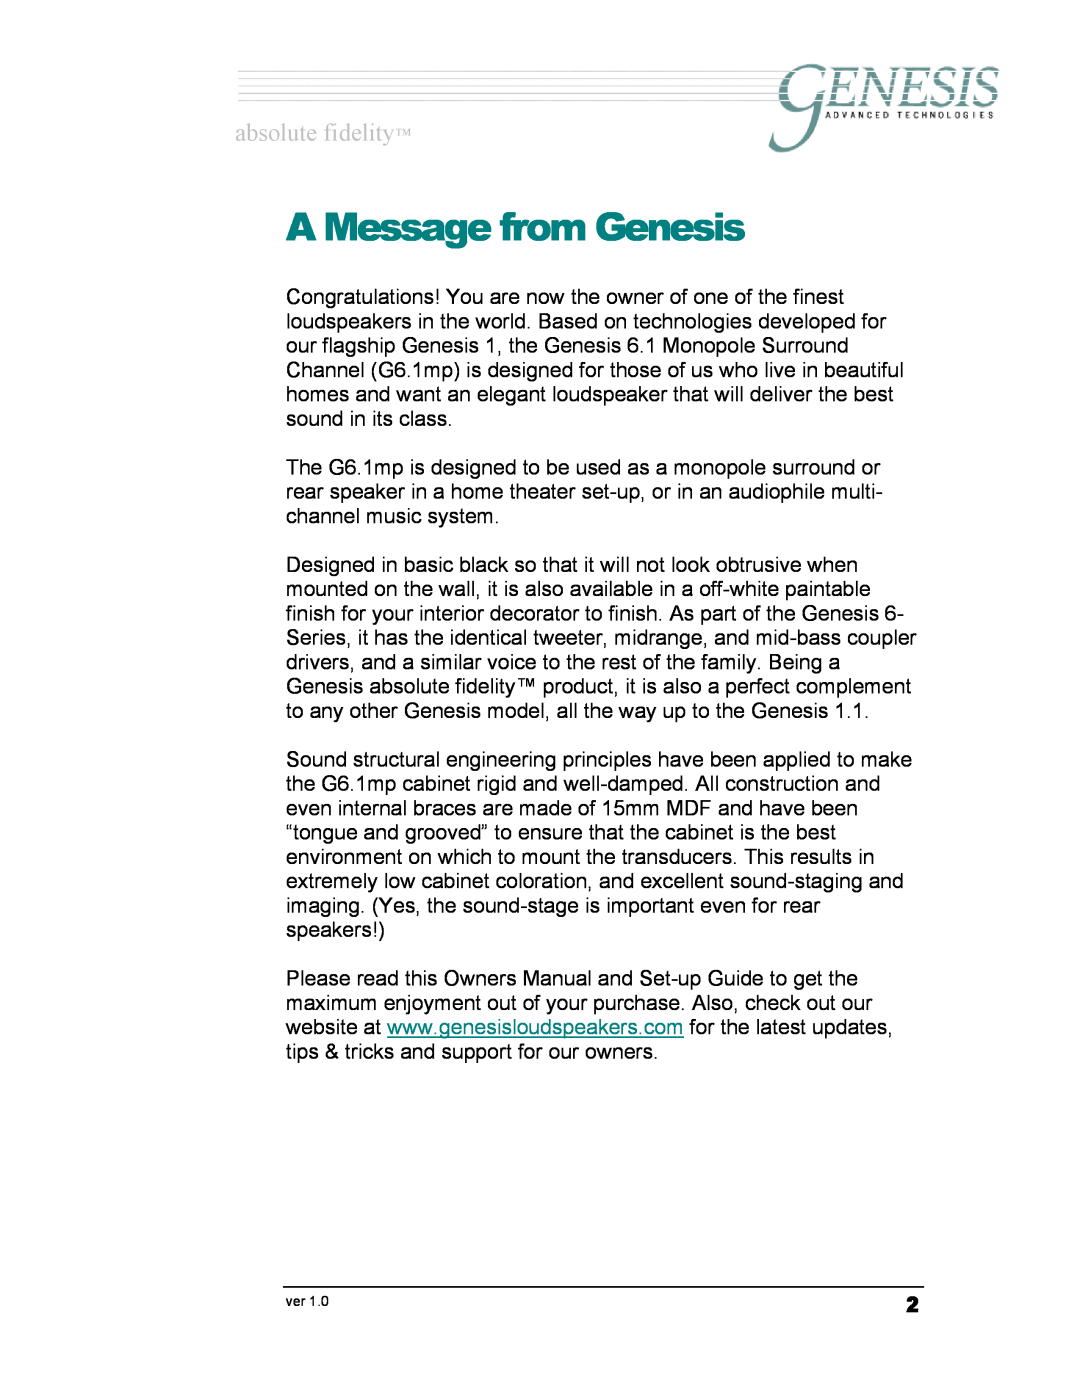 Genesis Advanced Technologies G6.1 owner manual A Message from Genesis, absolute fidelity 